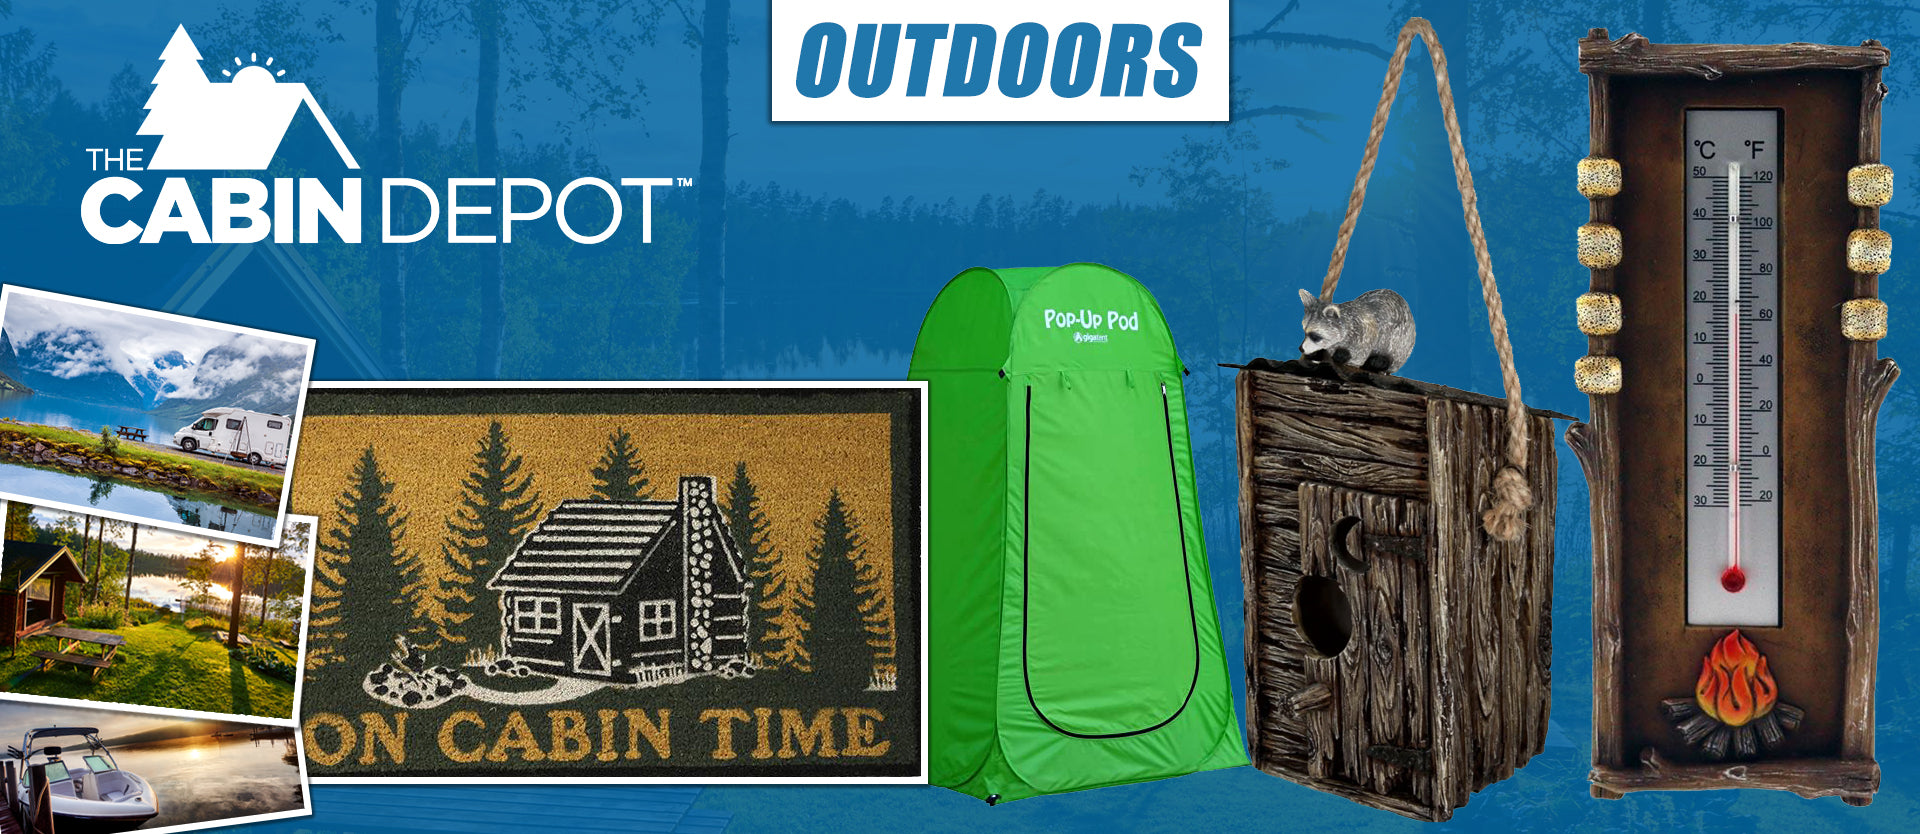 Outdoors Decor Off Grid The Cabin Depot ™ Canada